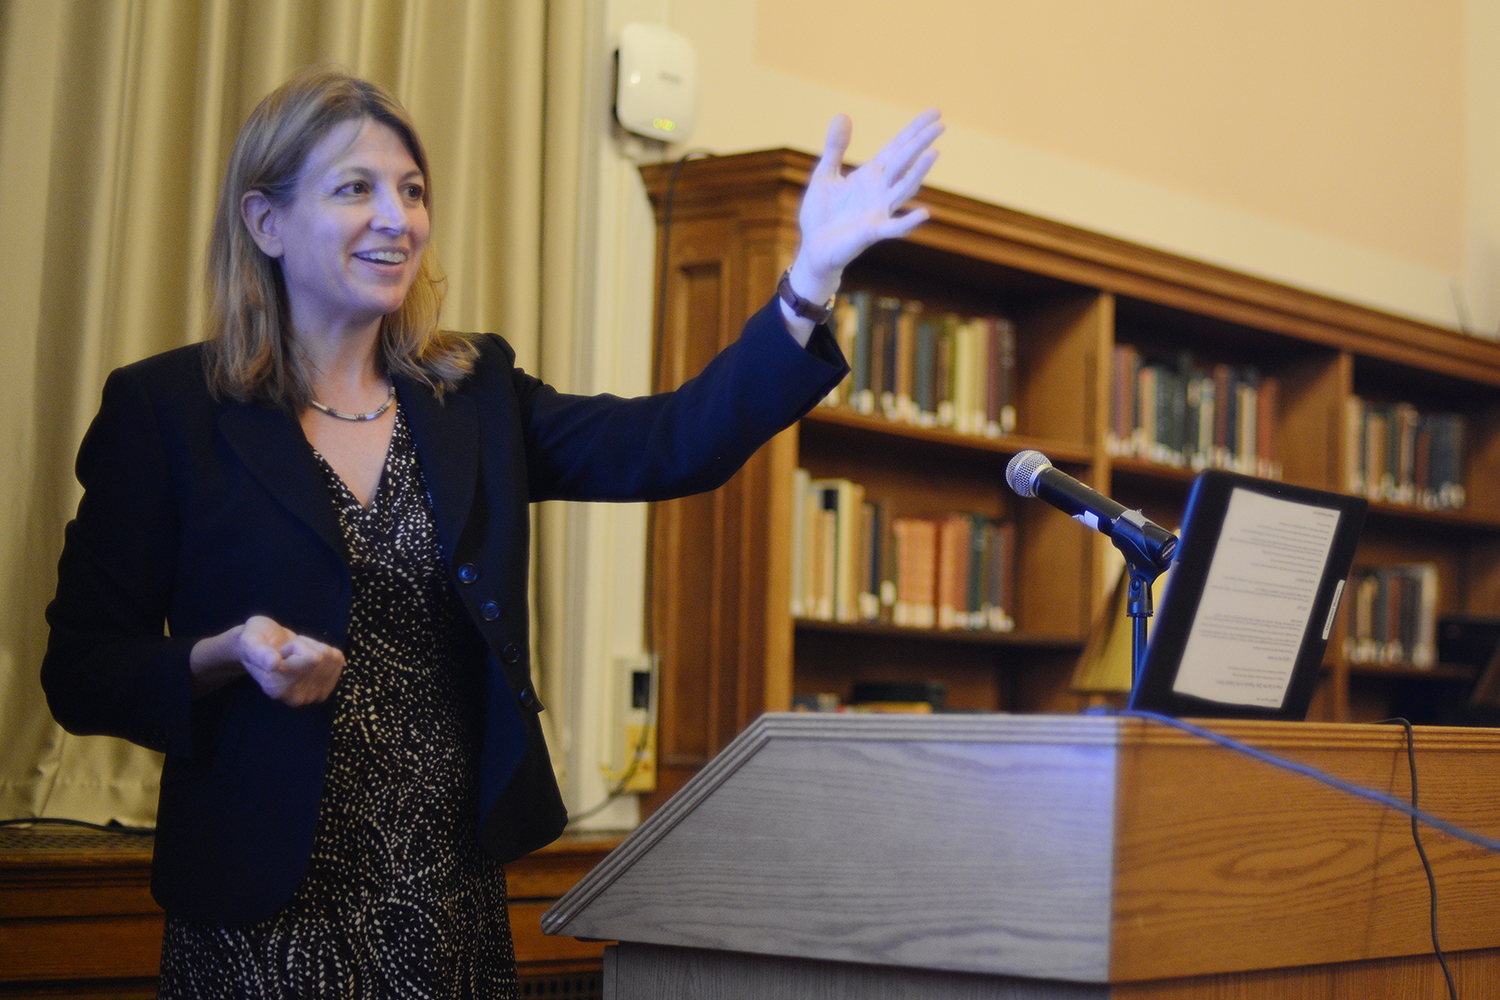 Bethany Berger ’90, the Thomas F. Gallivan, Jr. Professor at the University of Connecticut School of Law, delivered the annual Constitution Day Lecture on Sept. 17 in Olin Library's Smith Reading Room. Her topic was “Birthright Citizenship on Trial — Immigration and Indigeneity.” Egged on by Donald Trump, the majority of Republican candidates have supported ending birthright citizenship. This talk looked at this 14th Amendment right, its constitutional origins, and the different things it meant for American Indians and immigrants.